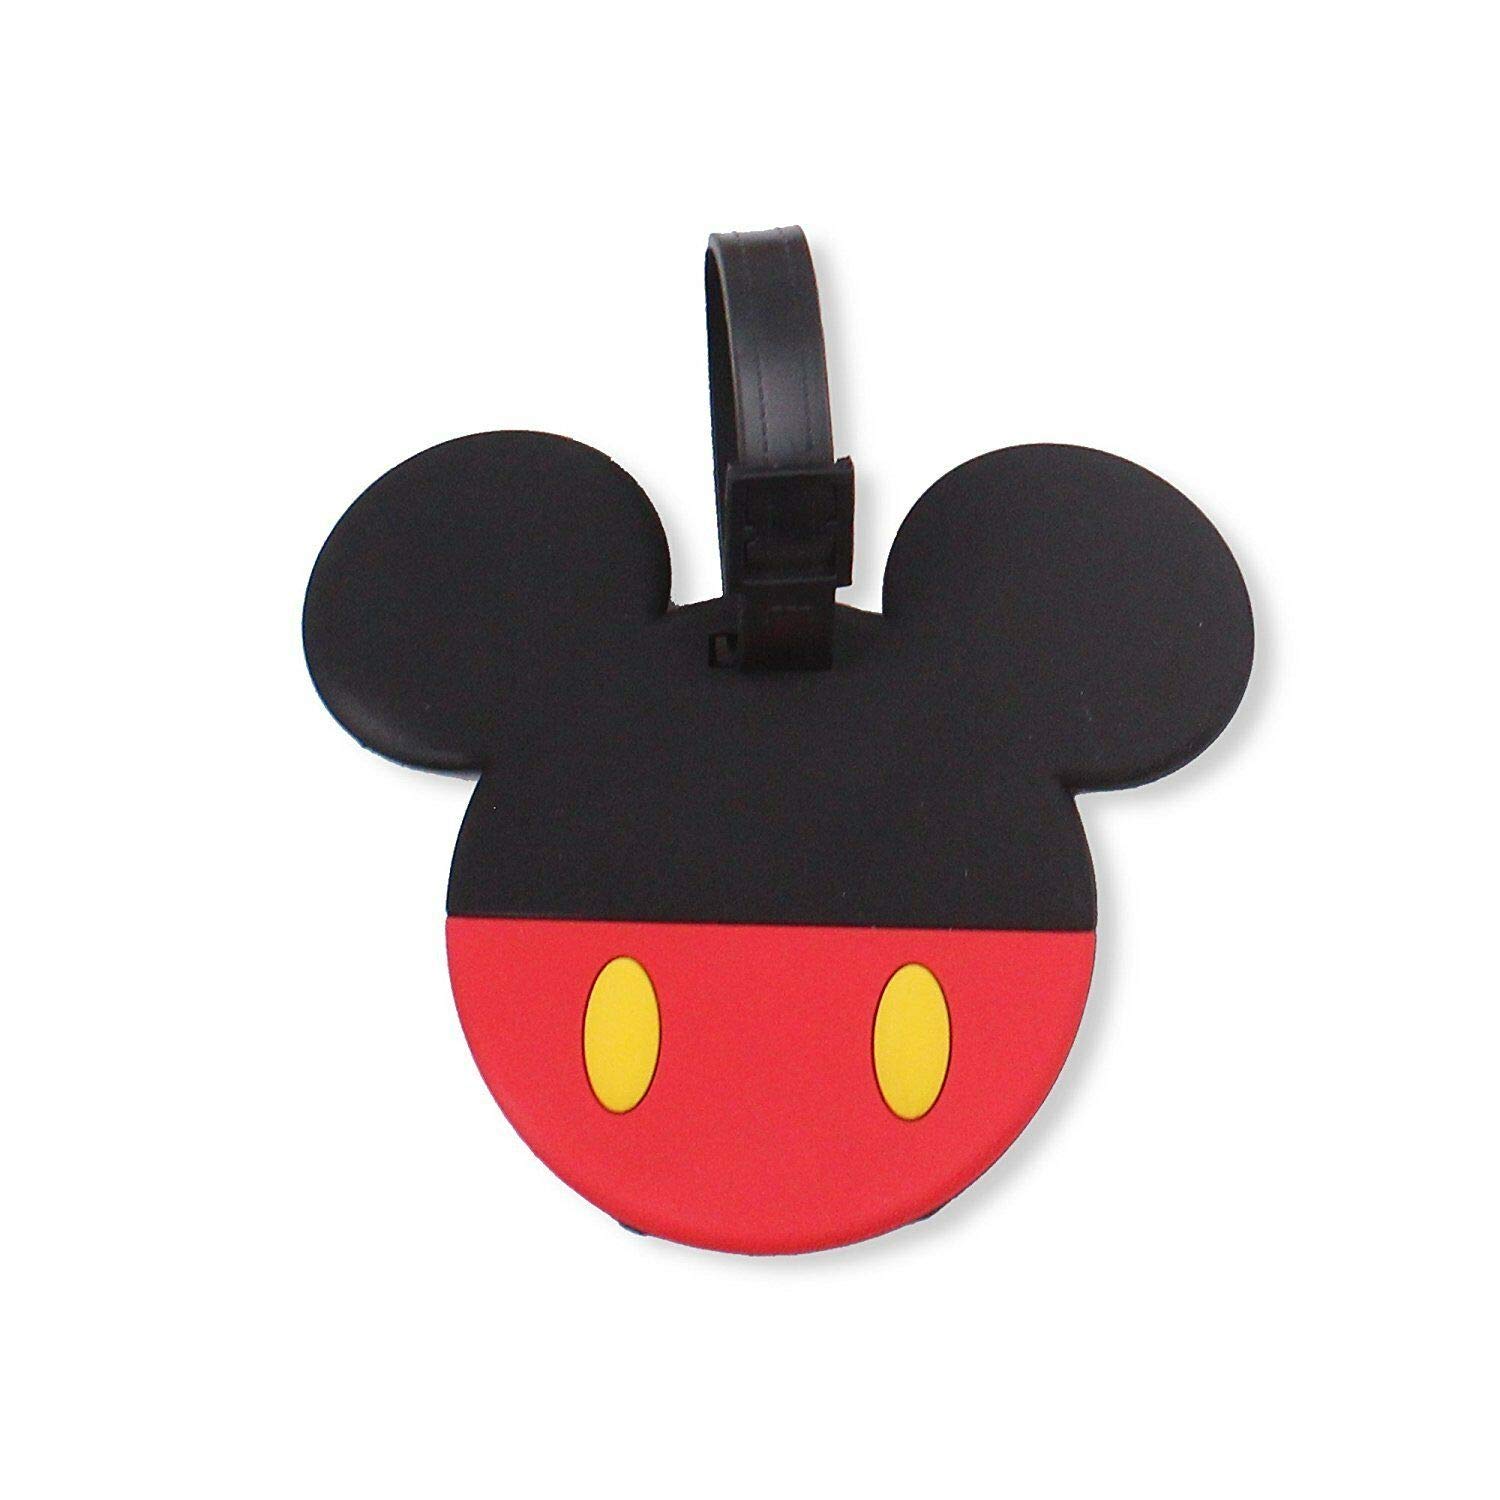 High Quality Set of 4 – Super Cute Cartoon Silicone Travel Luggage ID Tag for Bags (Planes)